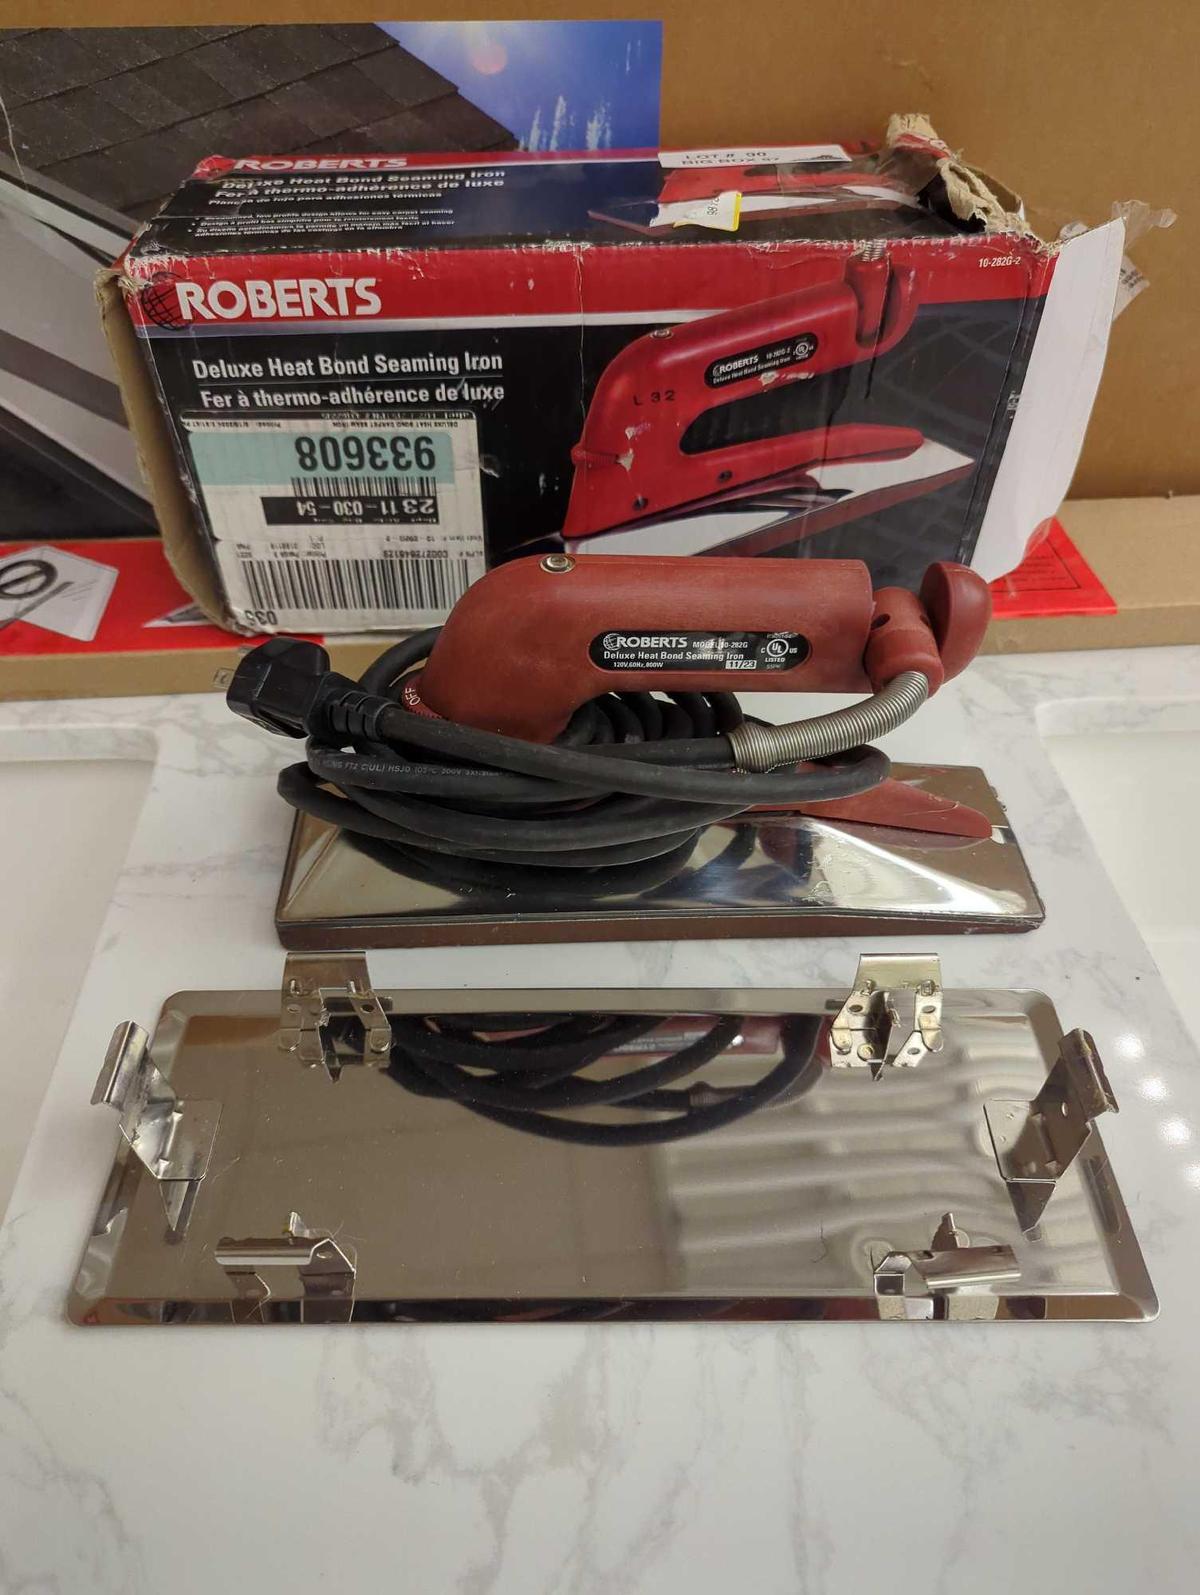 ROBERTS Deluxe Heat Bond Carpet Iron with Non-Stick, Grooved Base. Comes an open box as is shown.